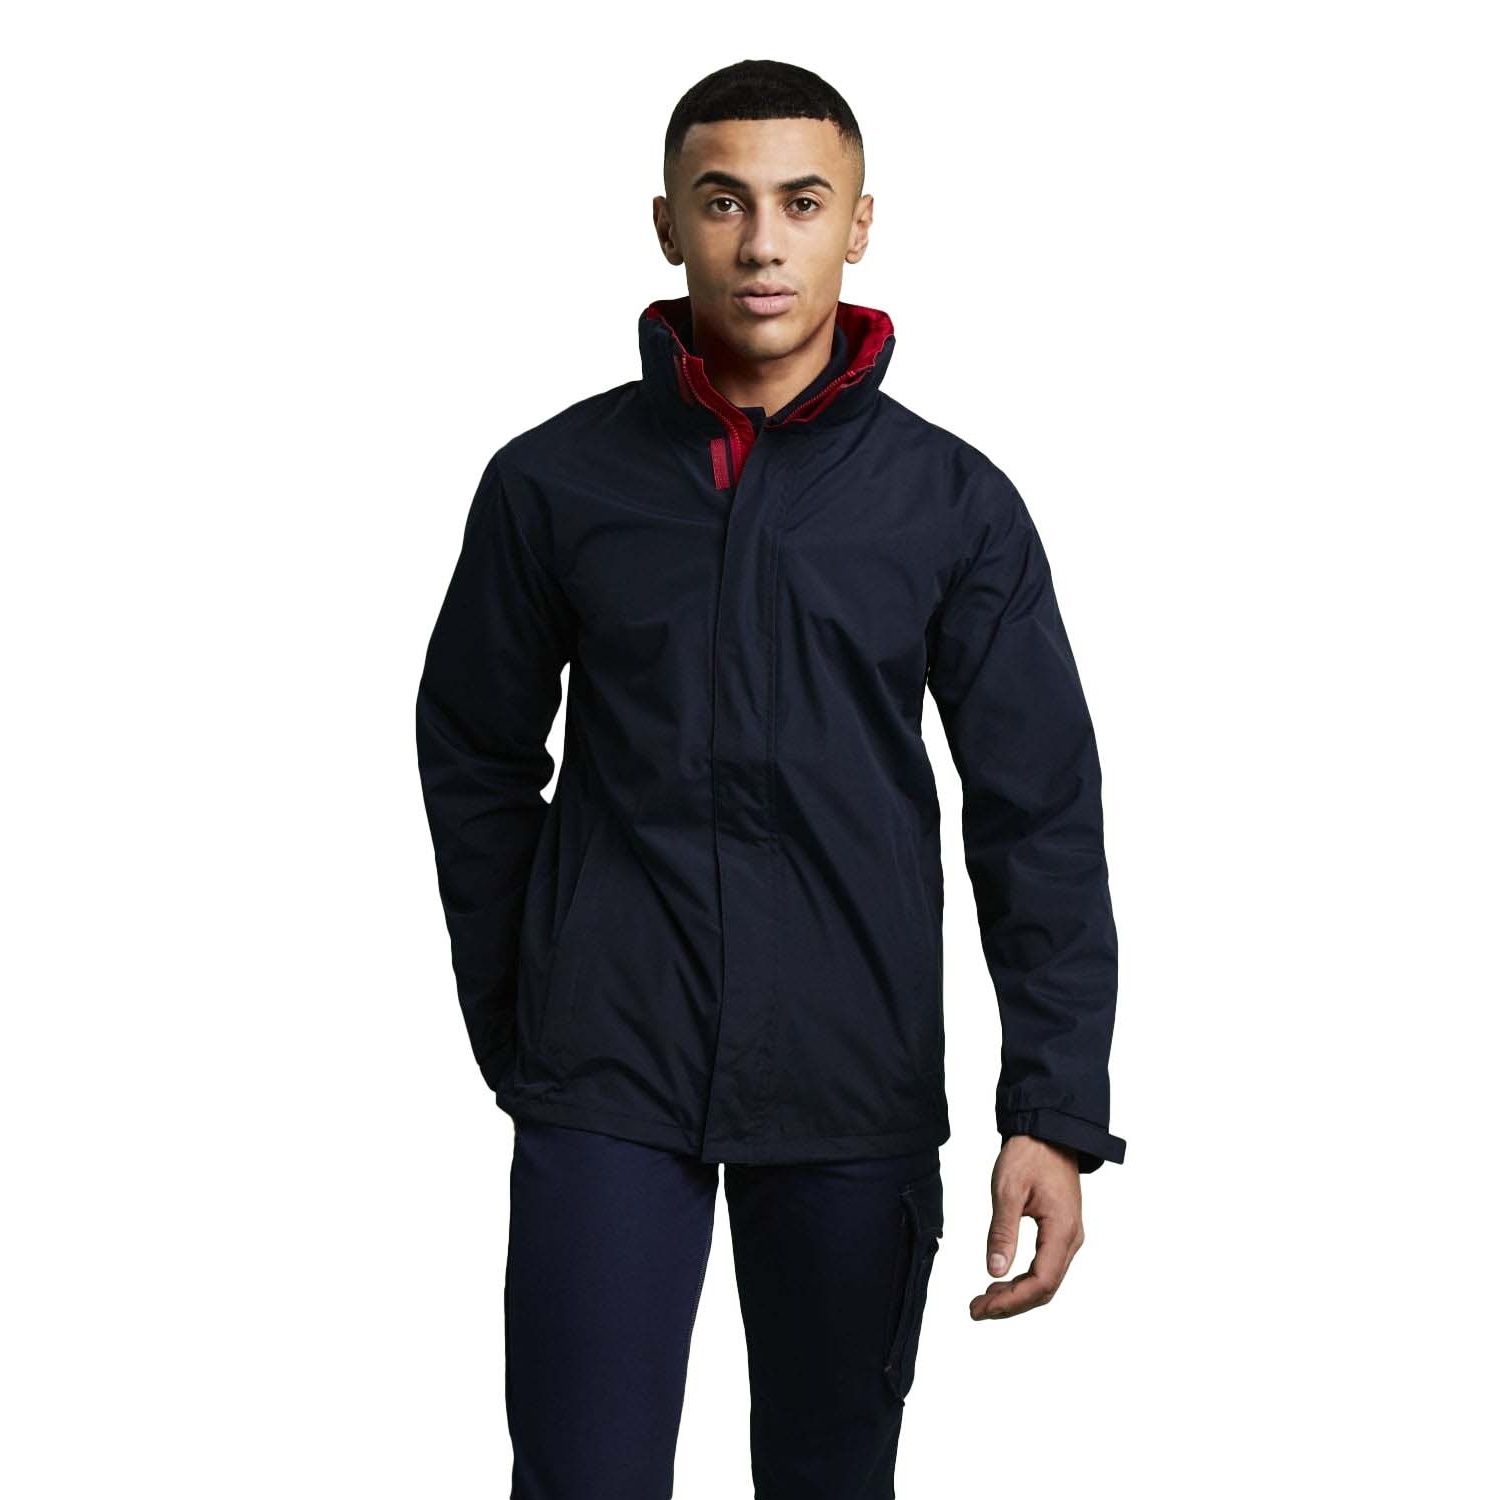 100% hydrafort polyester. Polyester mesh lined. Windproof fabric. Taped seams. Concealed hood with adjuster. 2 lower zipped pockets. 1 internal pocket with earphone cord access. Adjustable cuffs. Adjustable shockcord hem. Internal zipped embroidery access. Regatta Mens sizing (chest approx): XS (35-36in/89-91.5cm), S (37-38in/94-96.5cm), M (39-40in/99-101.5cm), L (41-42in/104-106.5cm), XL (43-44in/109-112cm), XXL (46-48in/117-122cm), XXXL (49-51in/124.5-129.5cm), XXXXL (52-54in/132-137cm), XXXXXL (55-57in/140-145cm).